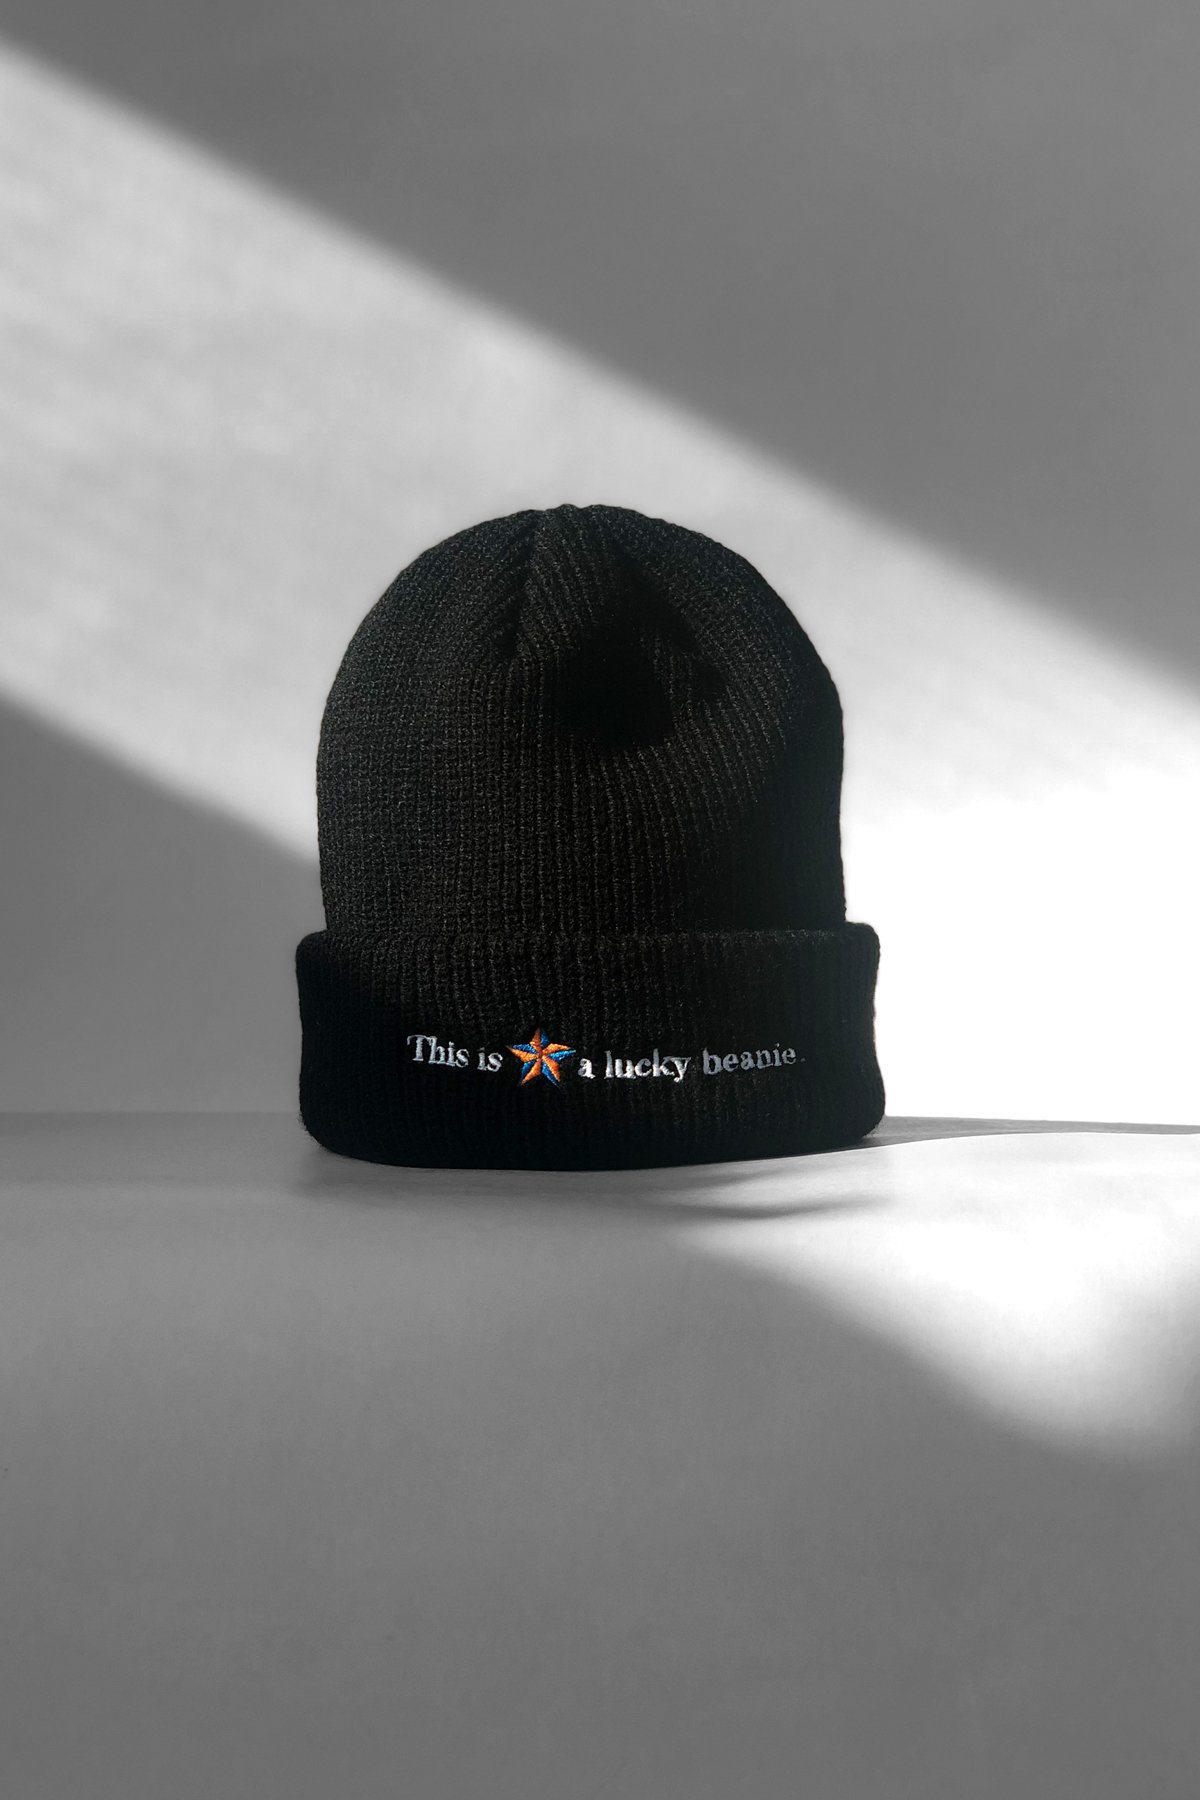 Graphic Embroidery Tee - "This is a Lucky Beanie." Embroidery Beanie